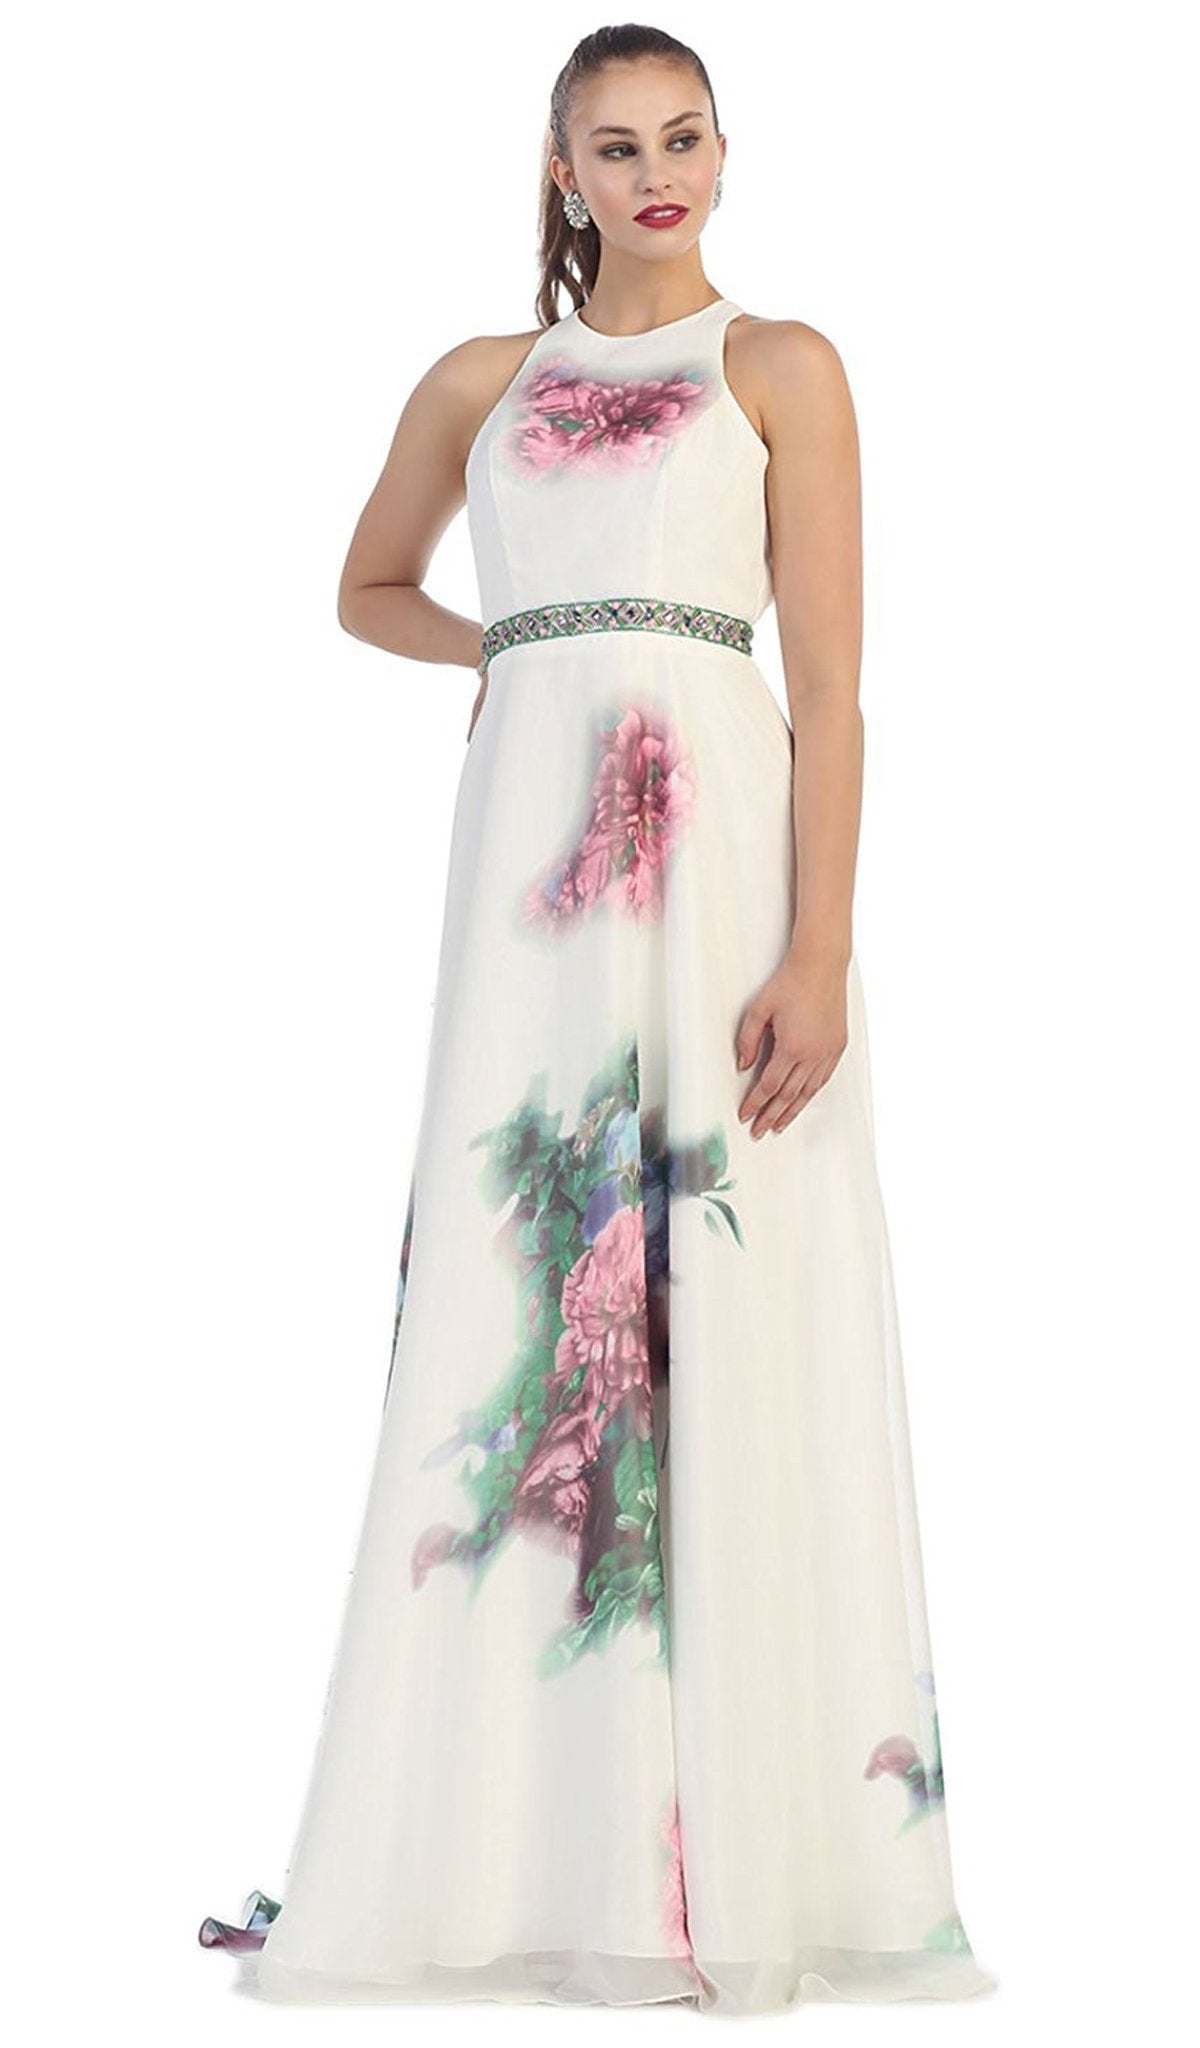 May Queen - RQ7427 Sleeveless Printed Chiffon Long Evening Dress Special Occasion Dress 2 / Ivory/Multi